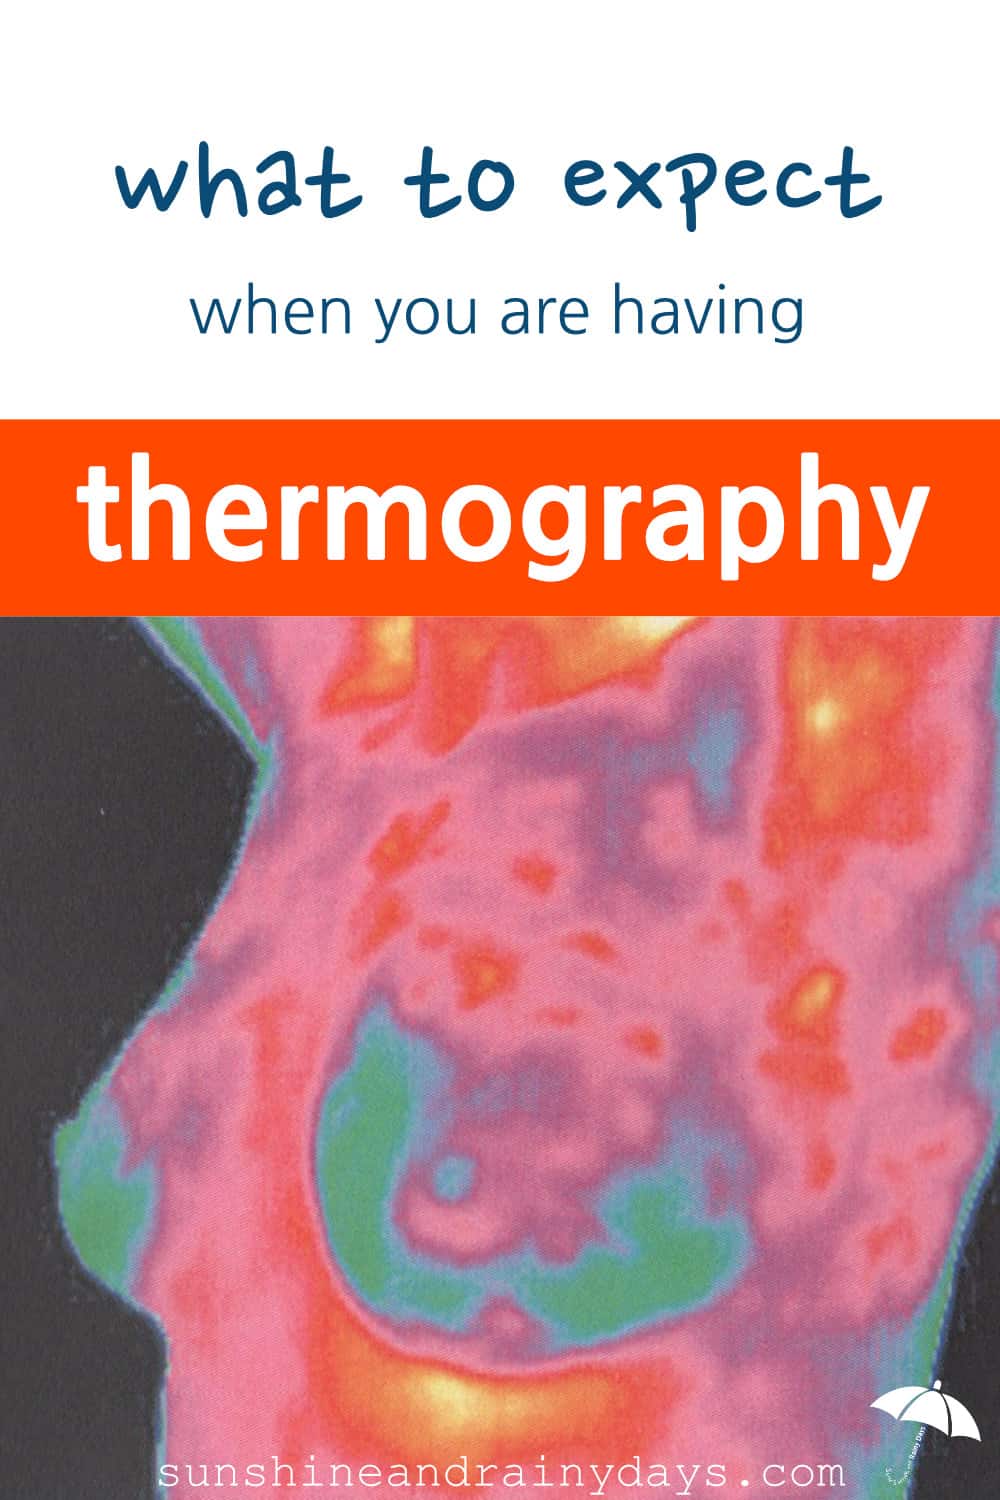 Have you ever thought about having thermography done? This post gives one woman's experience with thermography, how it's done, what she did with the results, and if she would do it again.